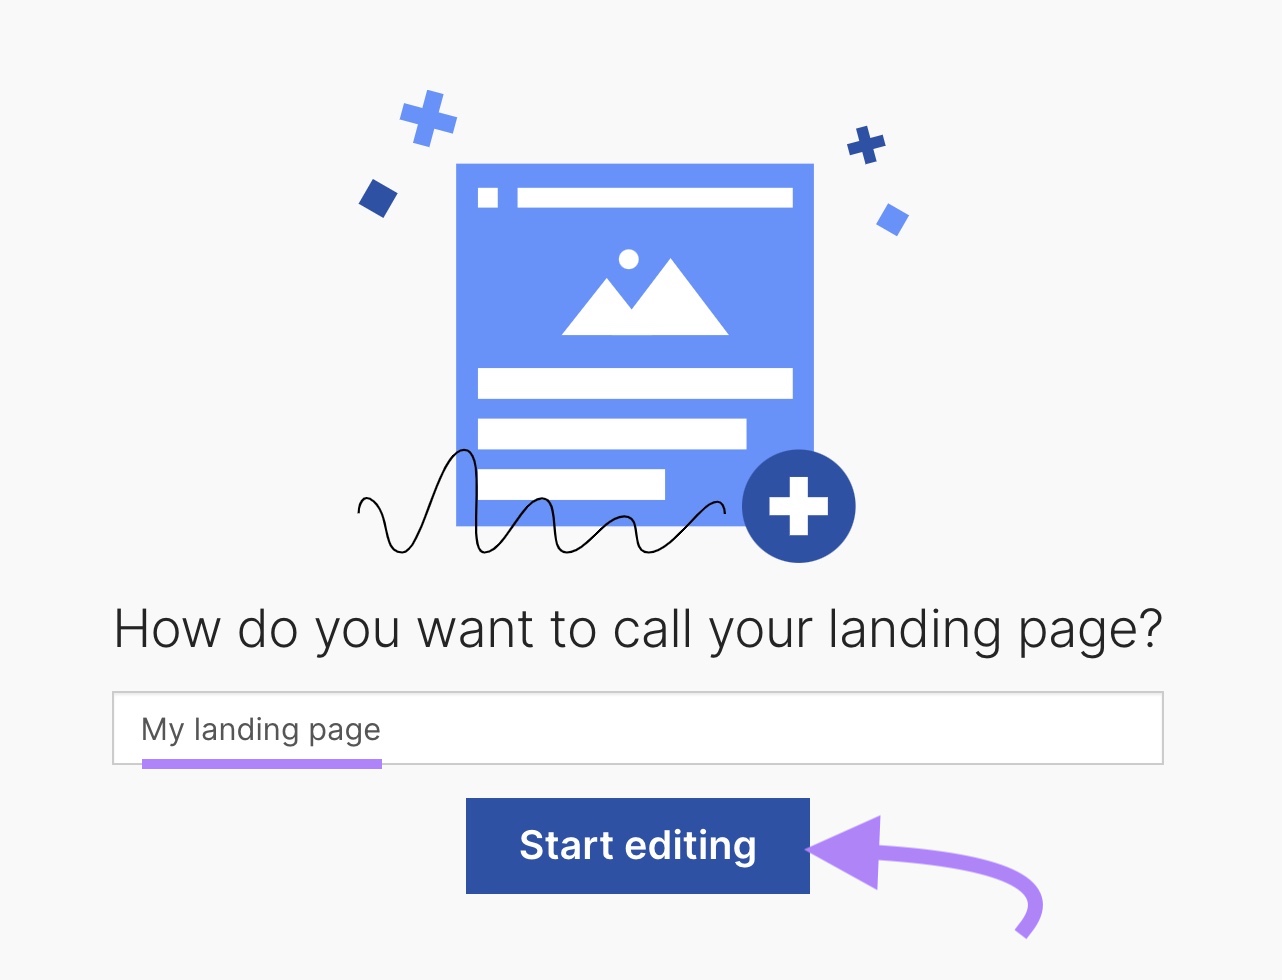 "My landing page" entered as the name for the page and the “Start editing” button clicked in the Semrush Landing Page Builder tool